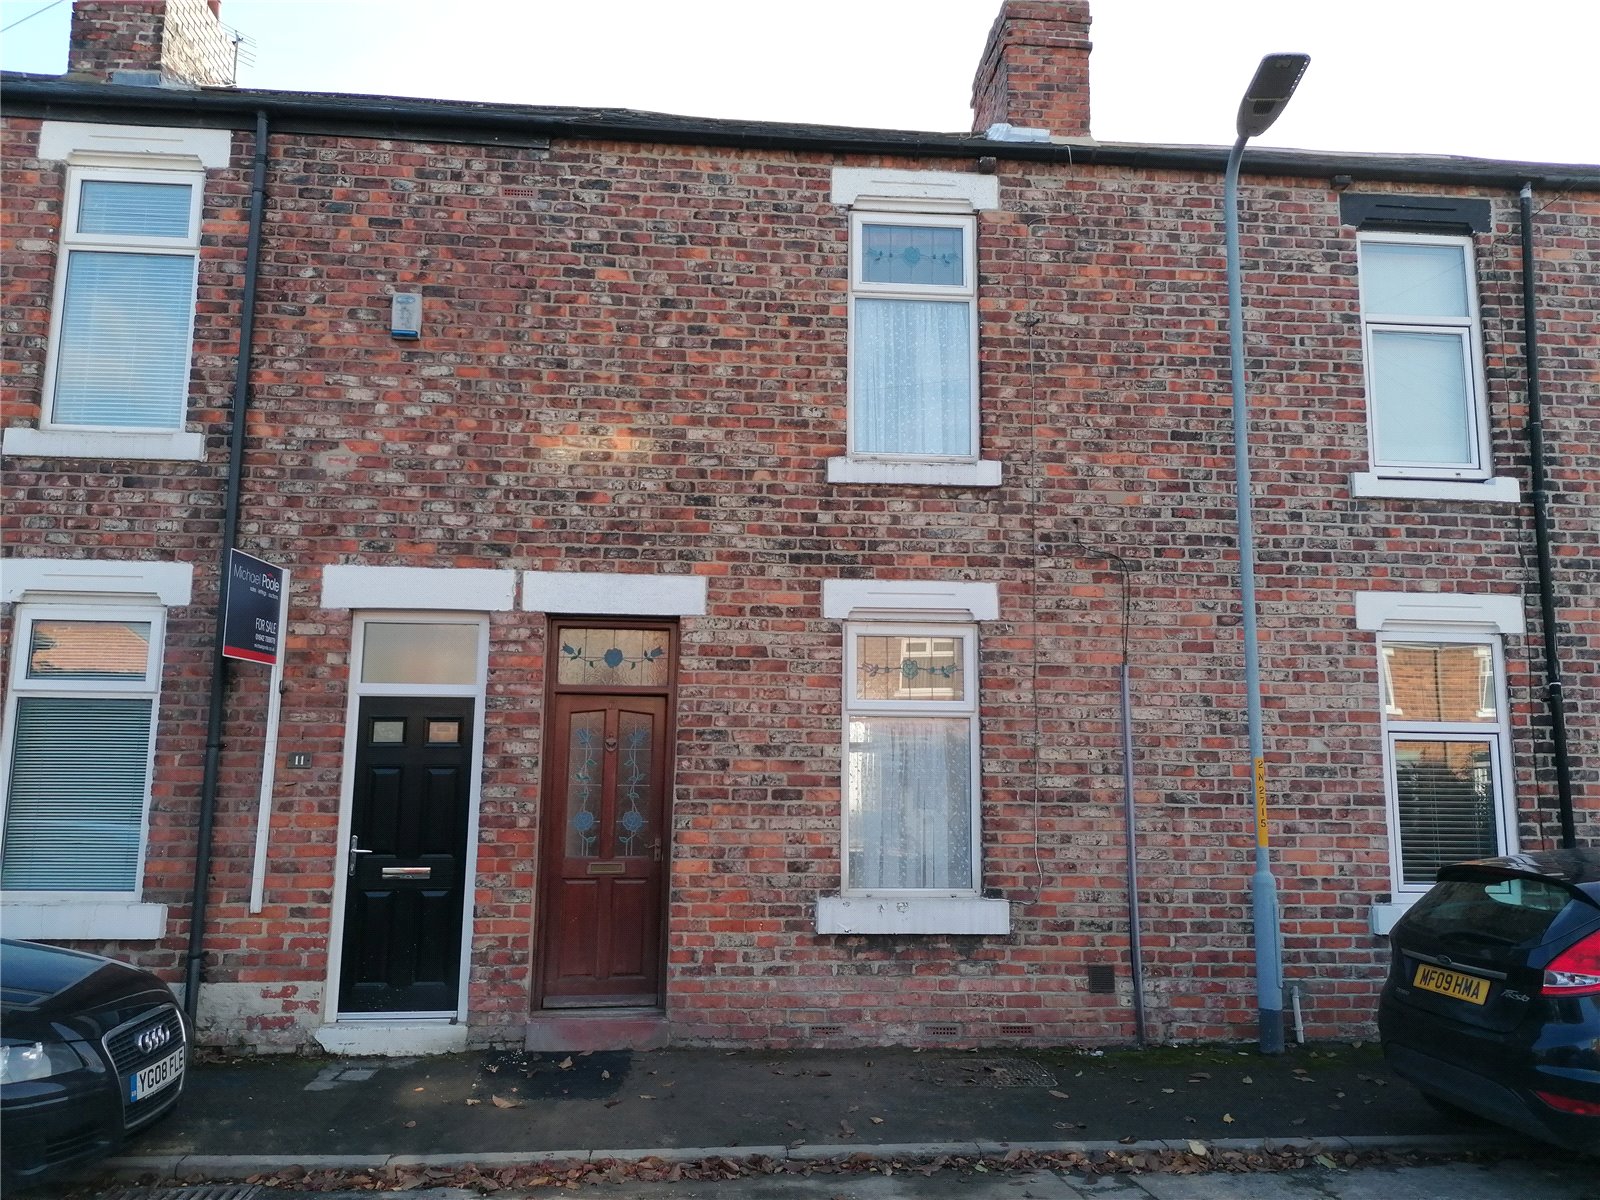 2 bed house to rent - Property Image 1